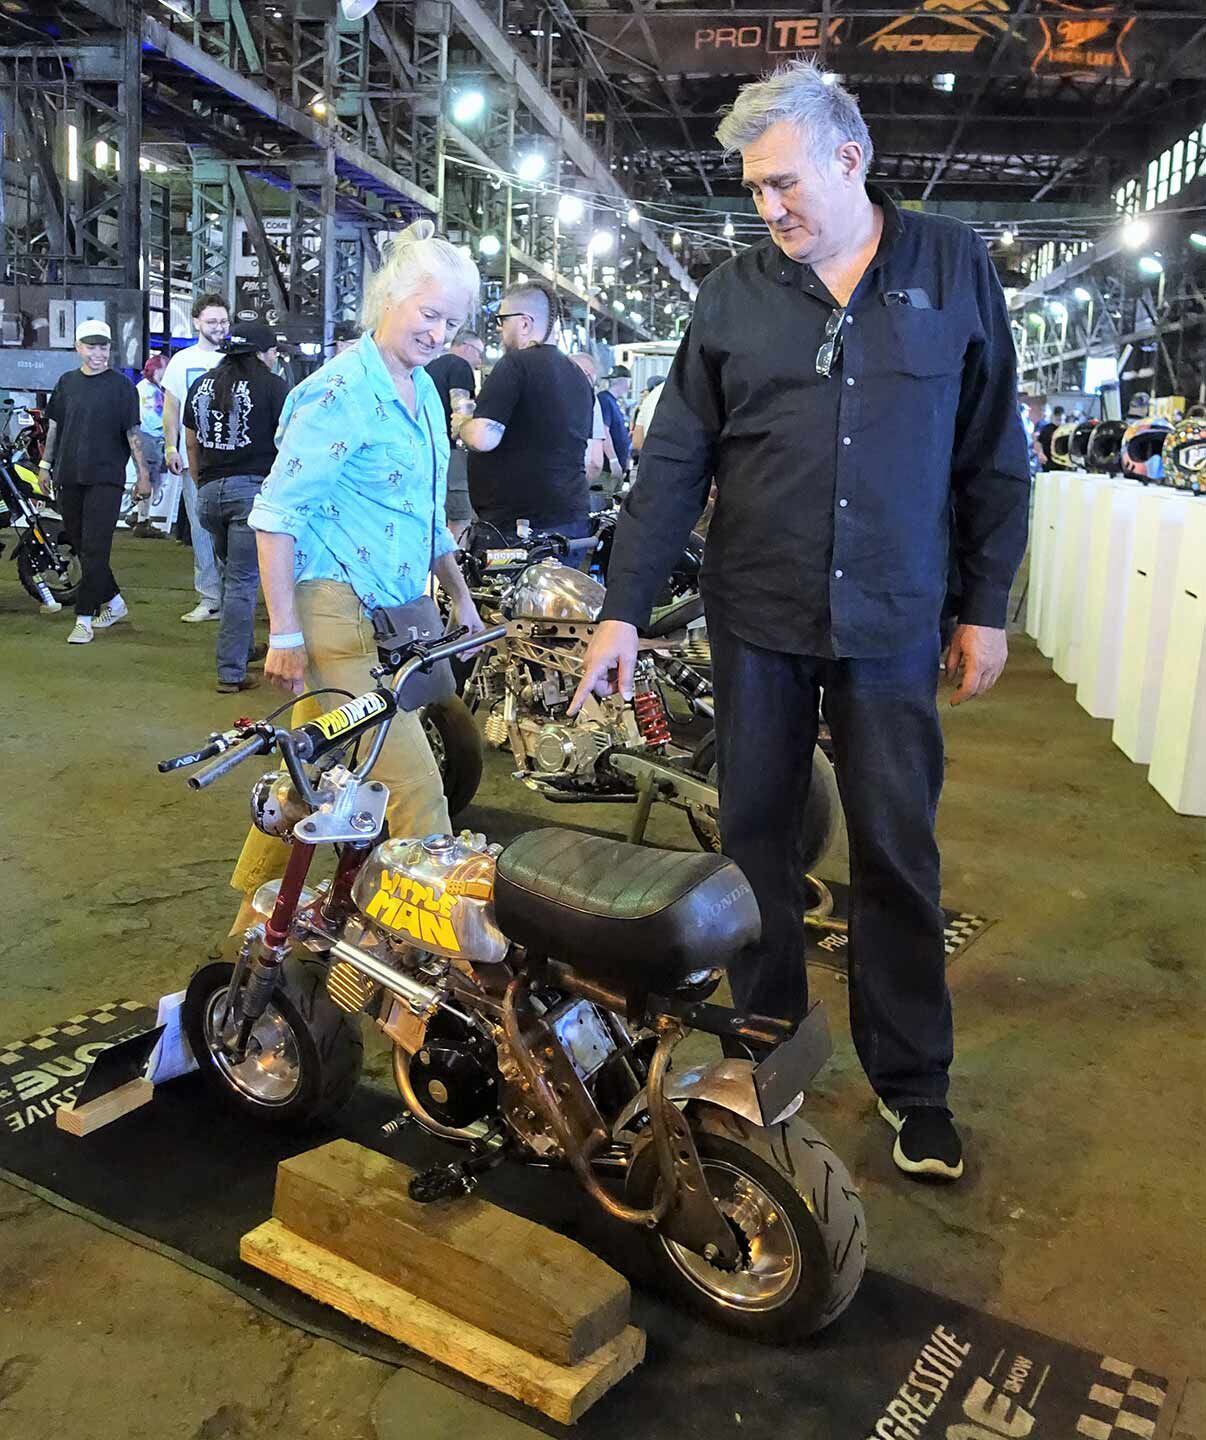 The One Moto draws some of the best designers in the biz. Here Piaggio’s Miguel Galluzzi is checking out “Lil’ Man,” a Honda Z50 that won the Heavy Metal Award.